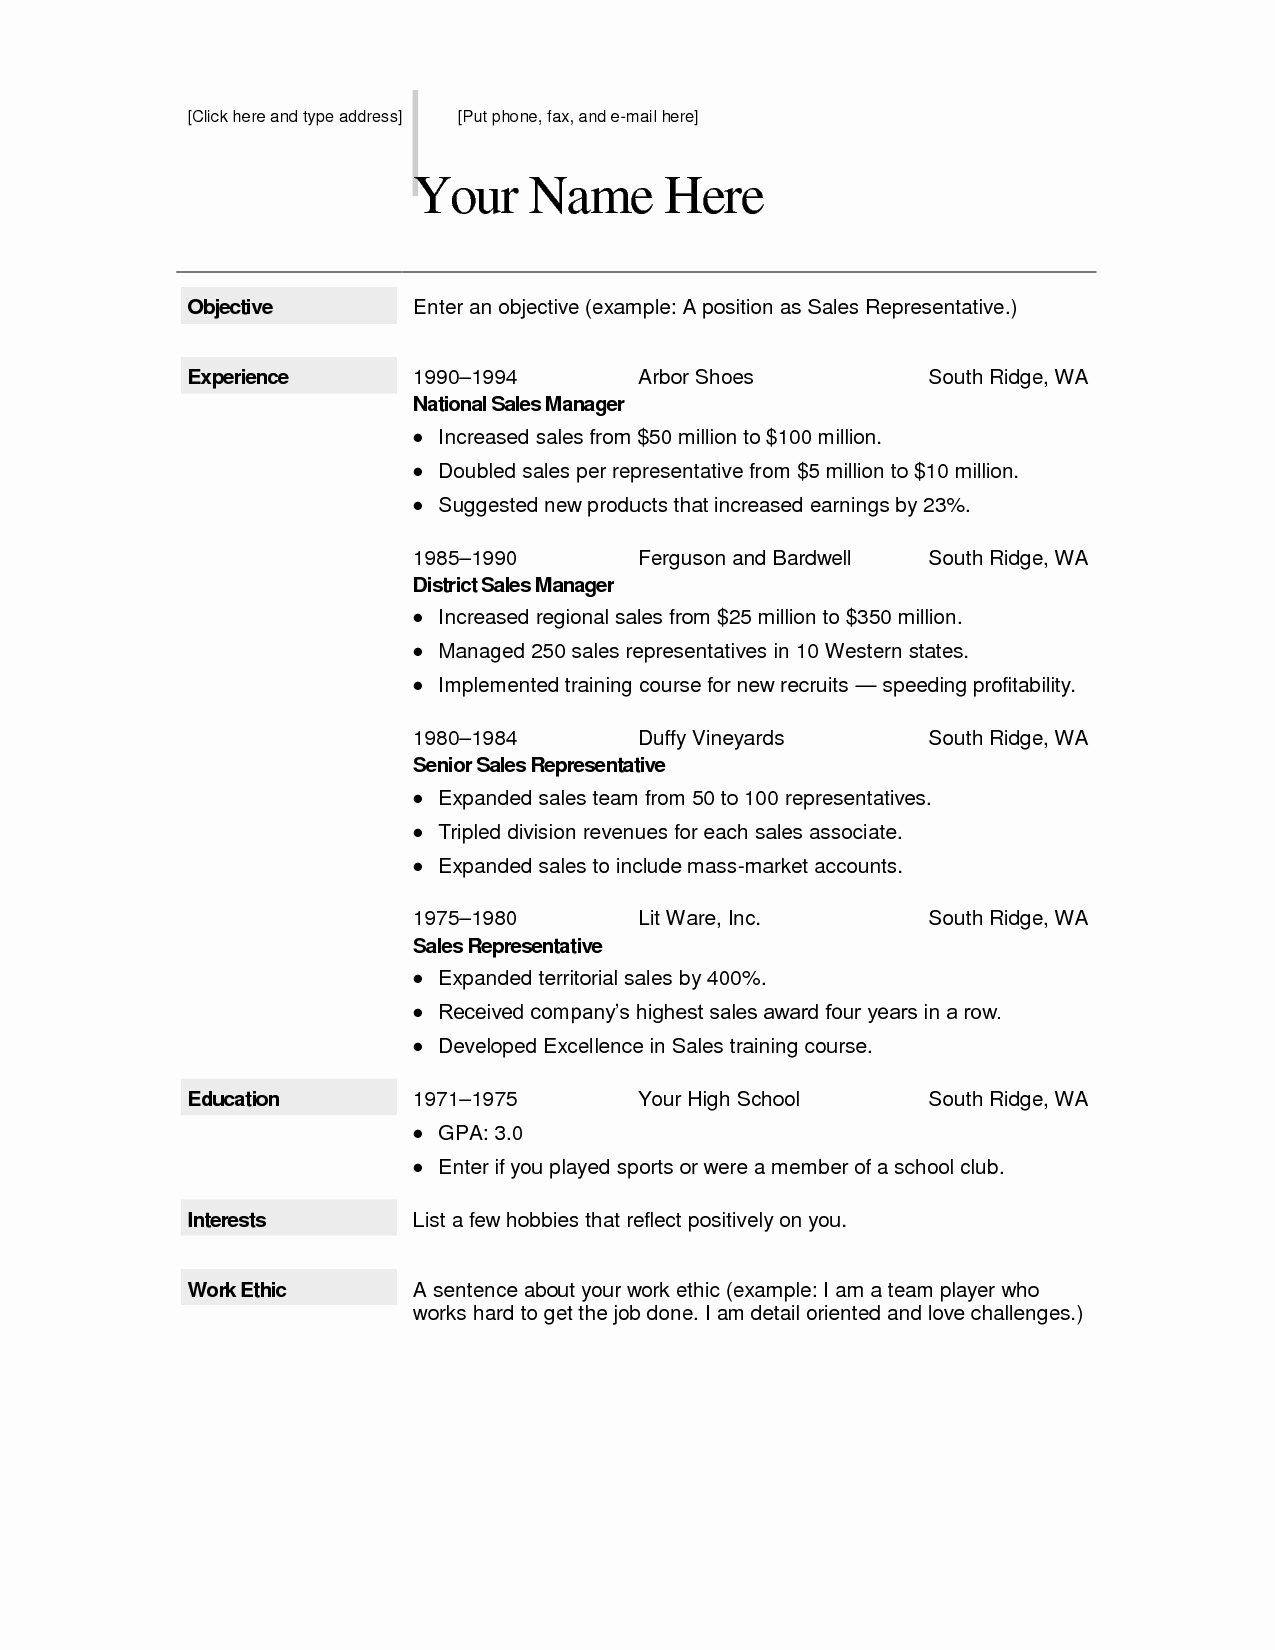 Free Resume Templates for Mac Awesome Free Creative Resume Templates for Macfree Creative Resume